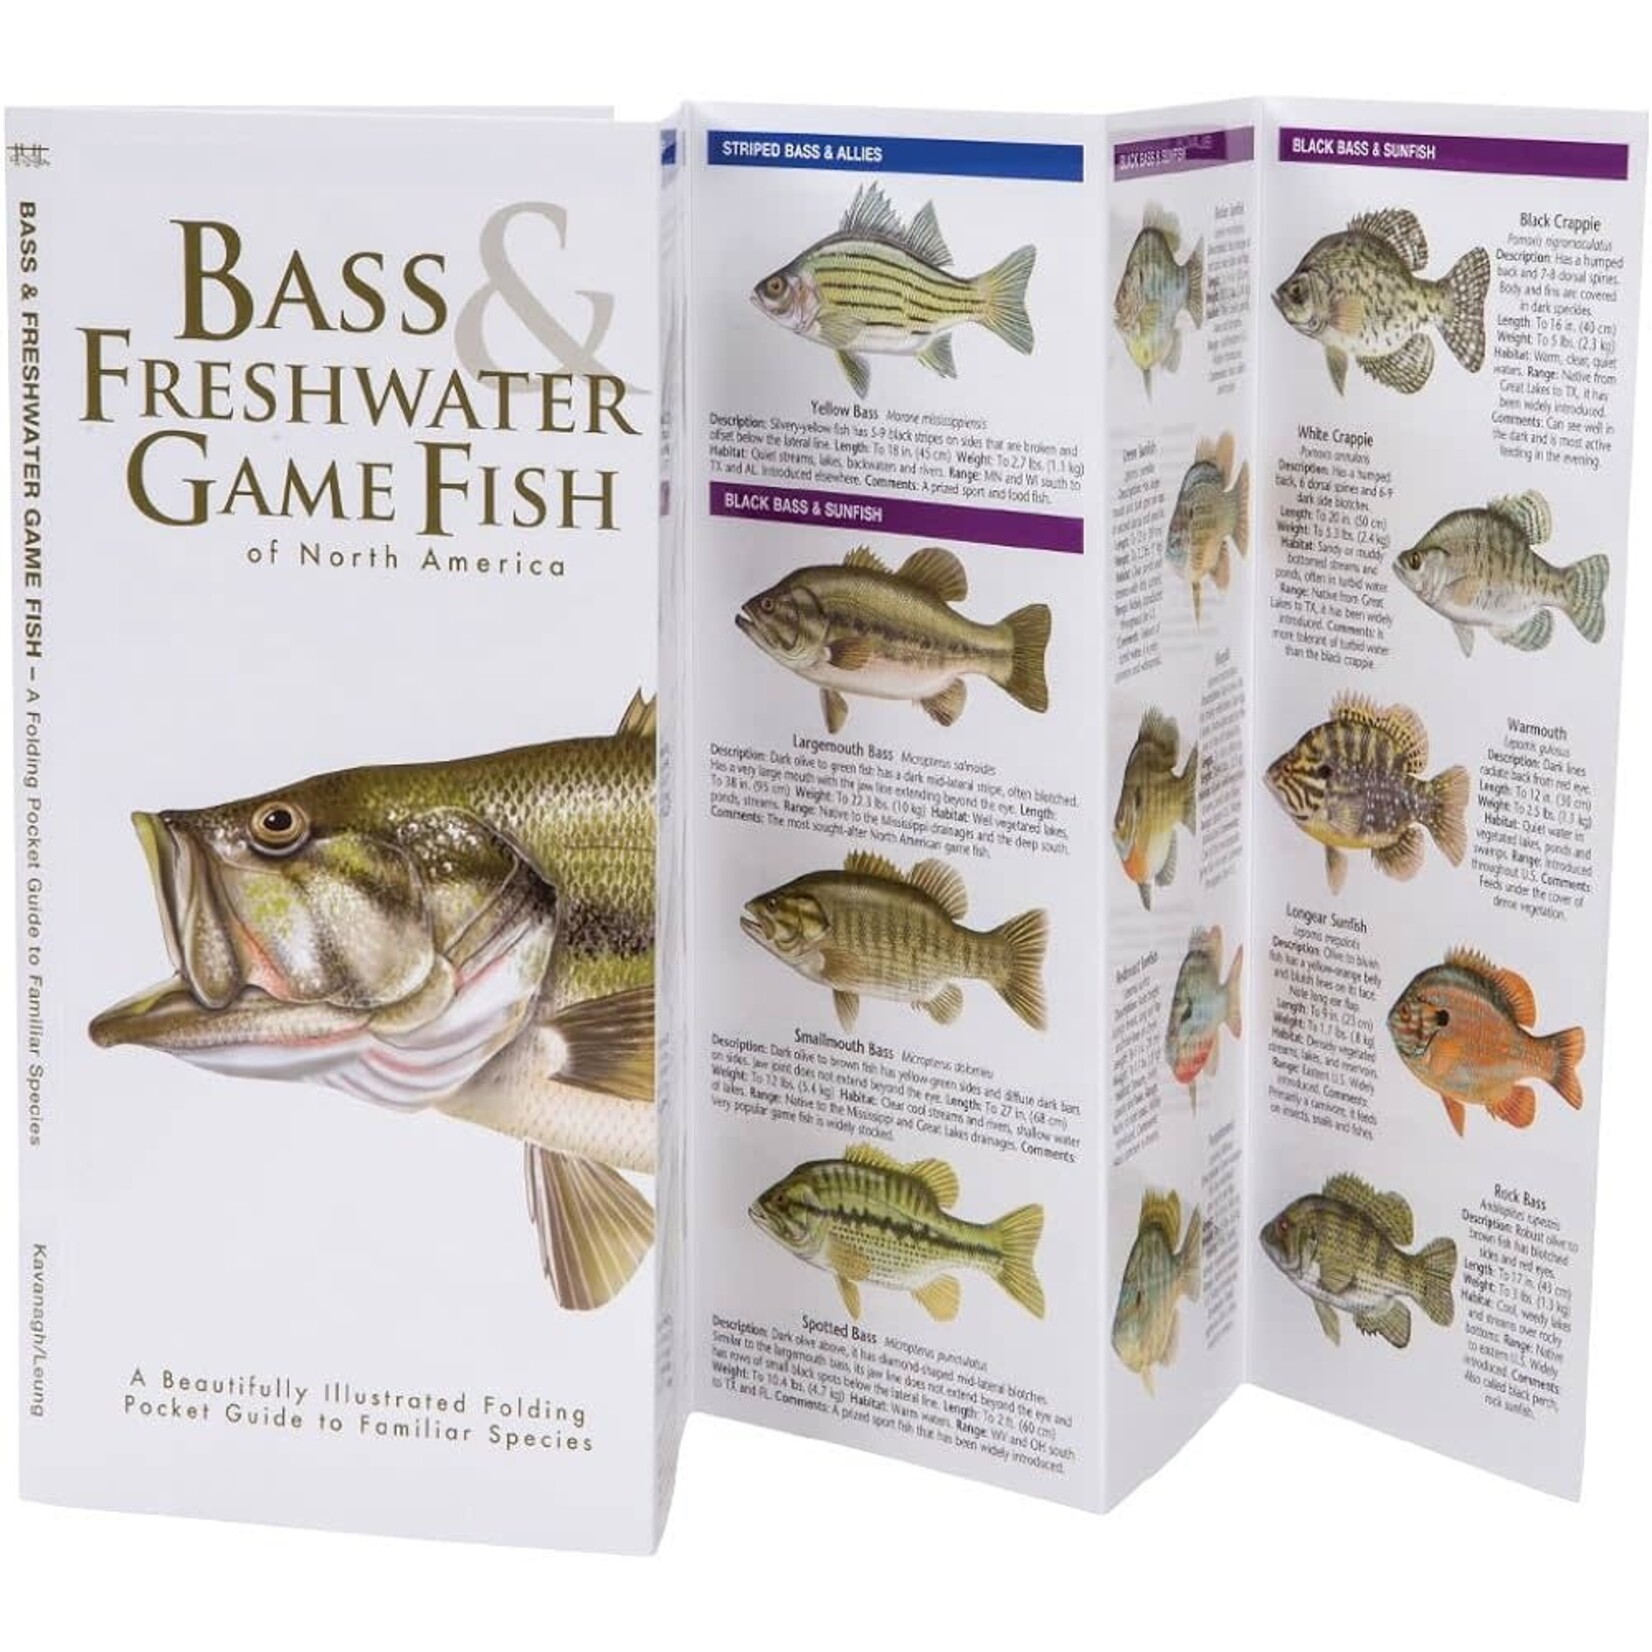 BASS & FRESHWATER GAME FISH Guide